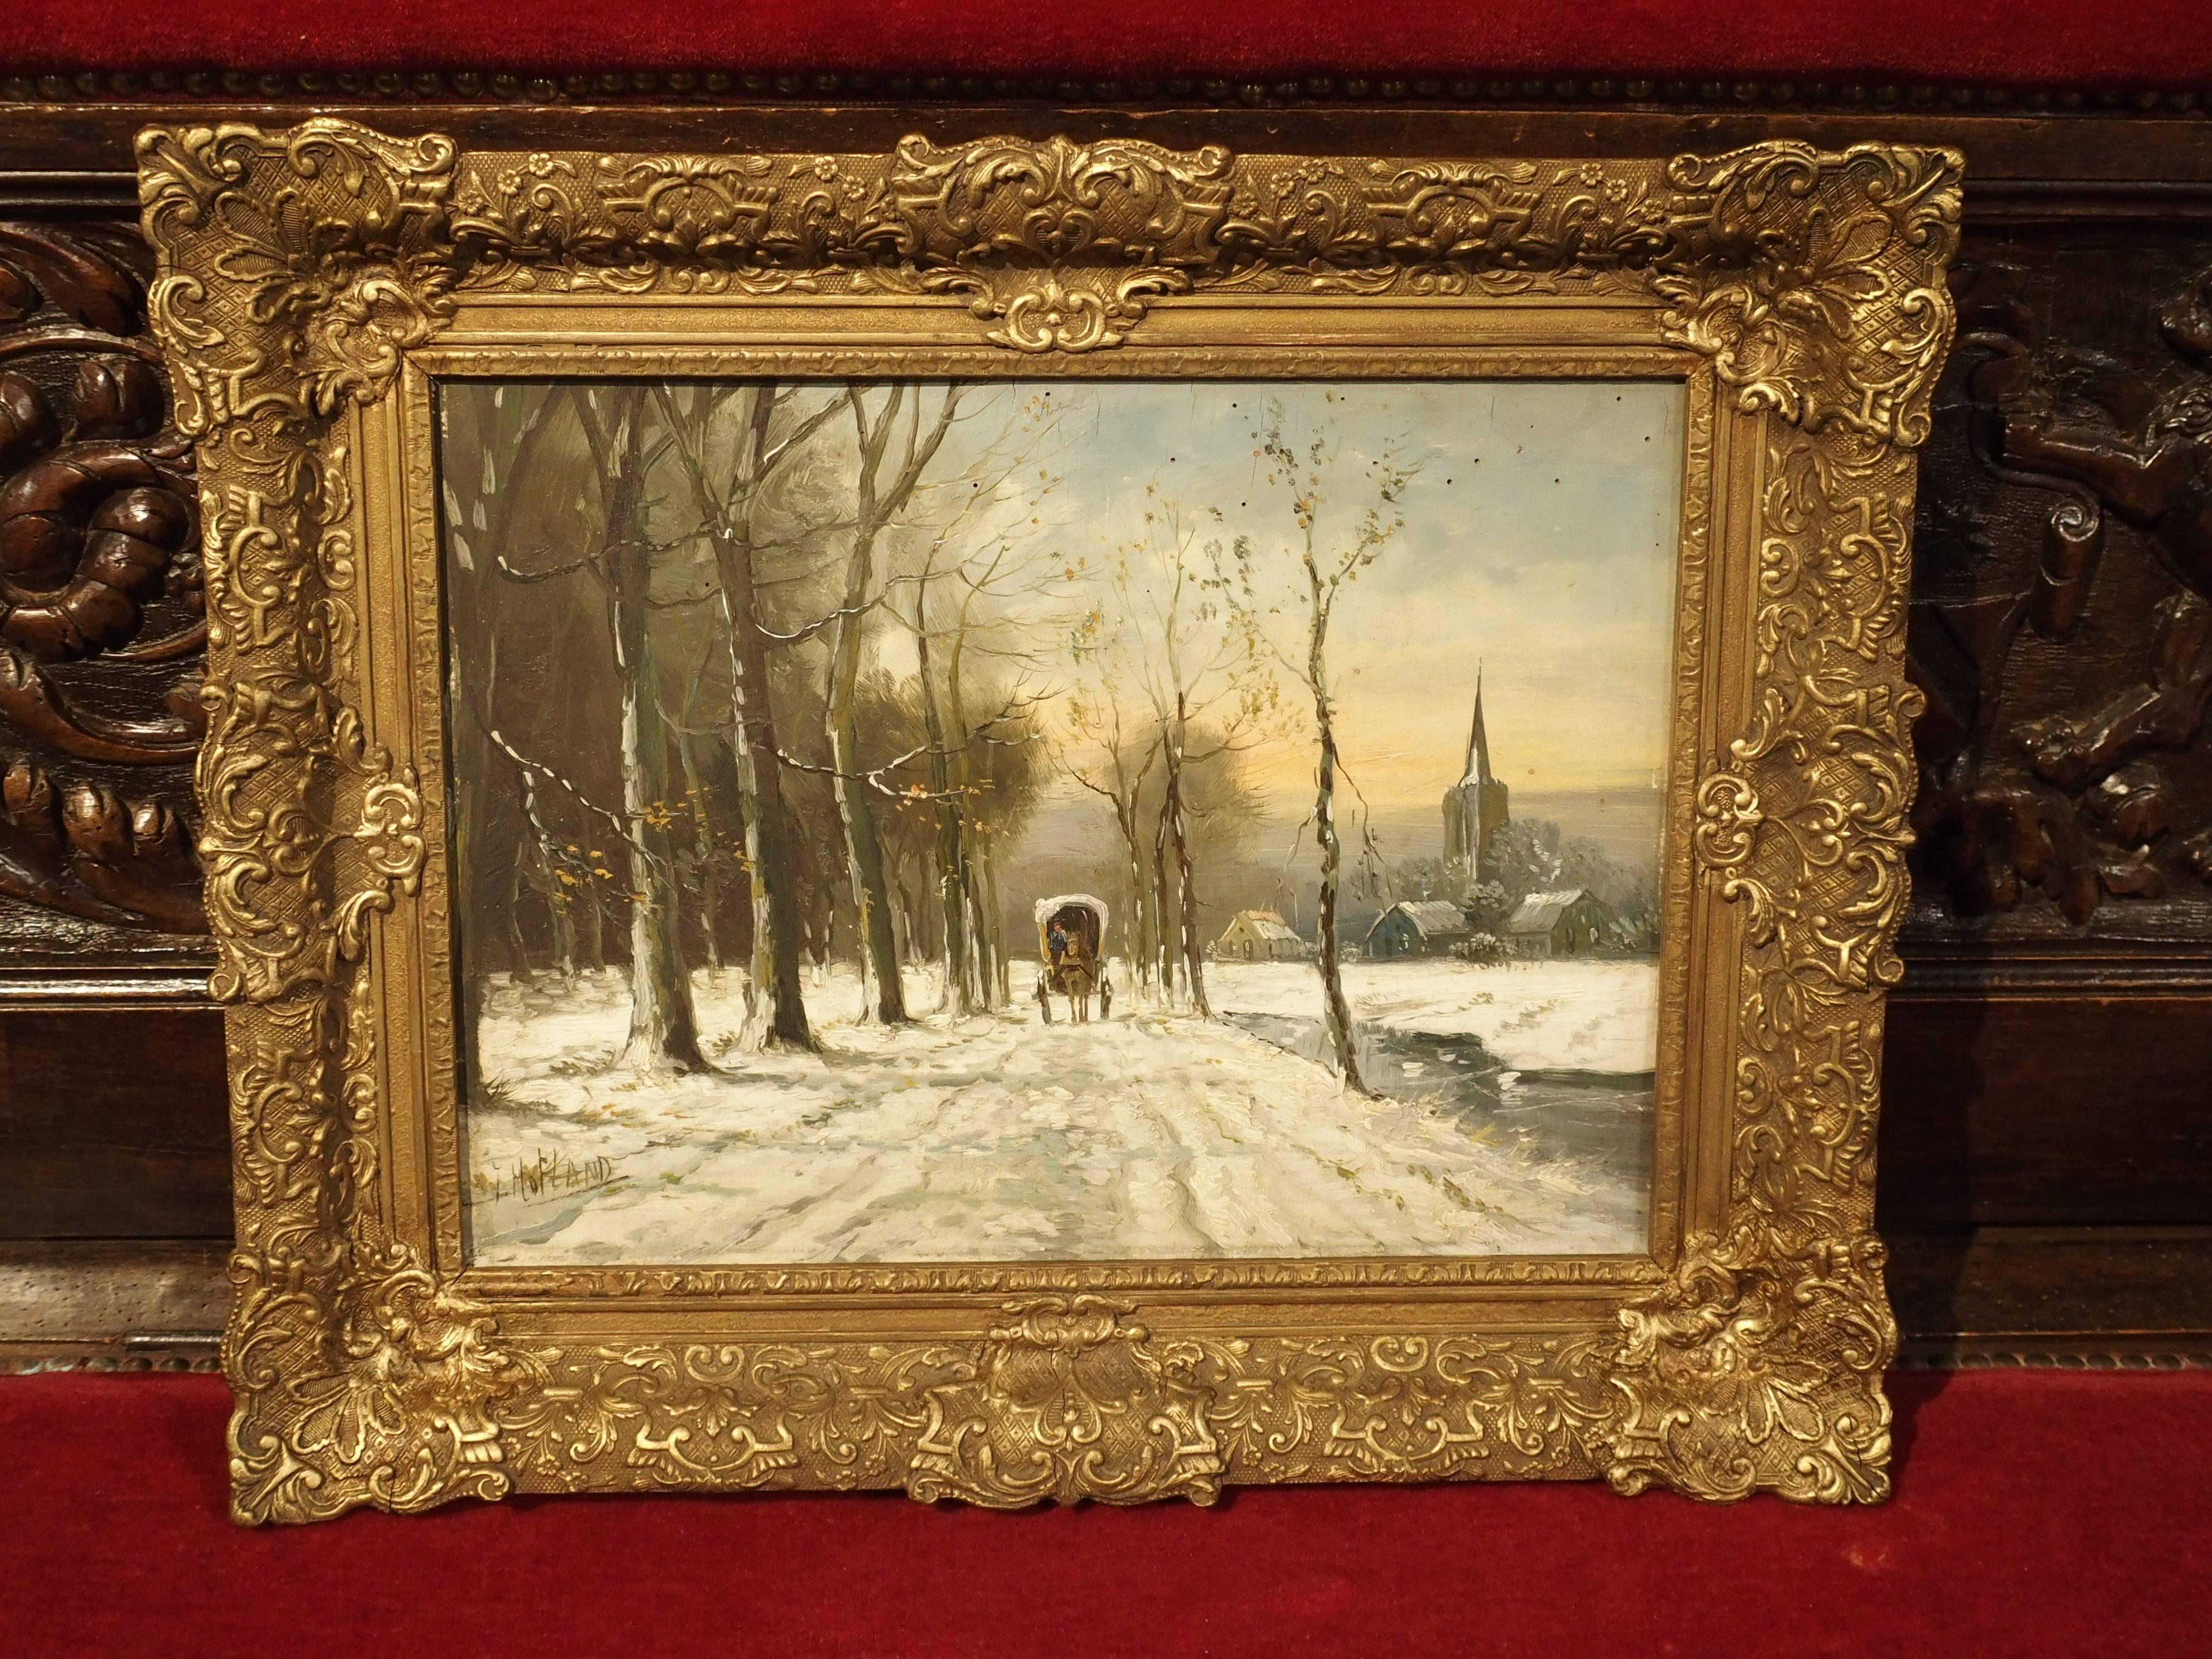 This small framed oil painting on board was done by Jan Hofland sometime in the 20th century. It depicts a wonderful winter scene of a covered horse drawn carriage traveling down a snowy, tree lined path. To the right of the path is a church with a